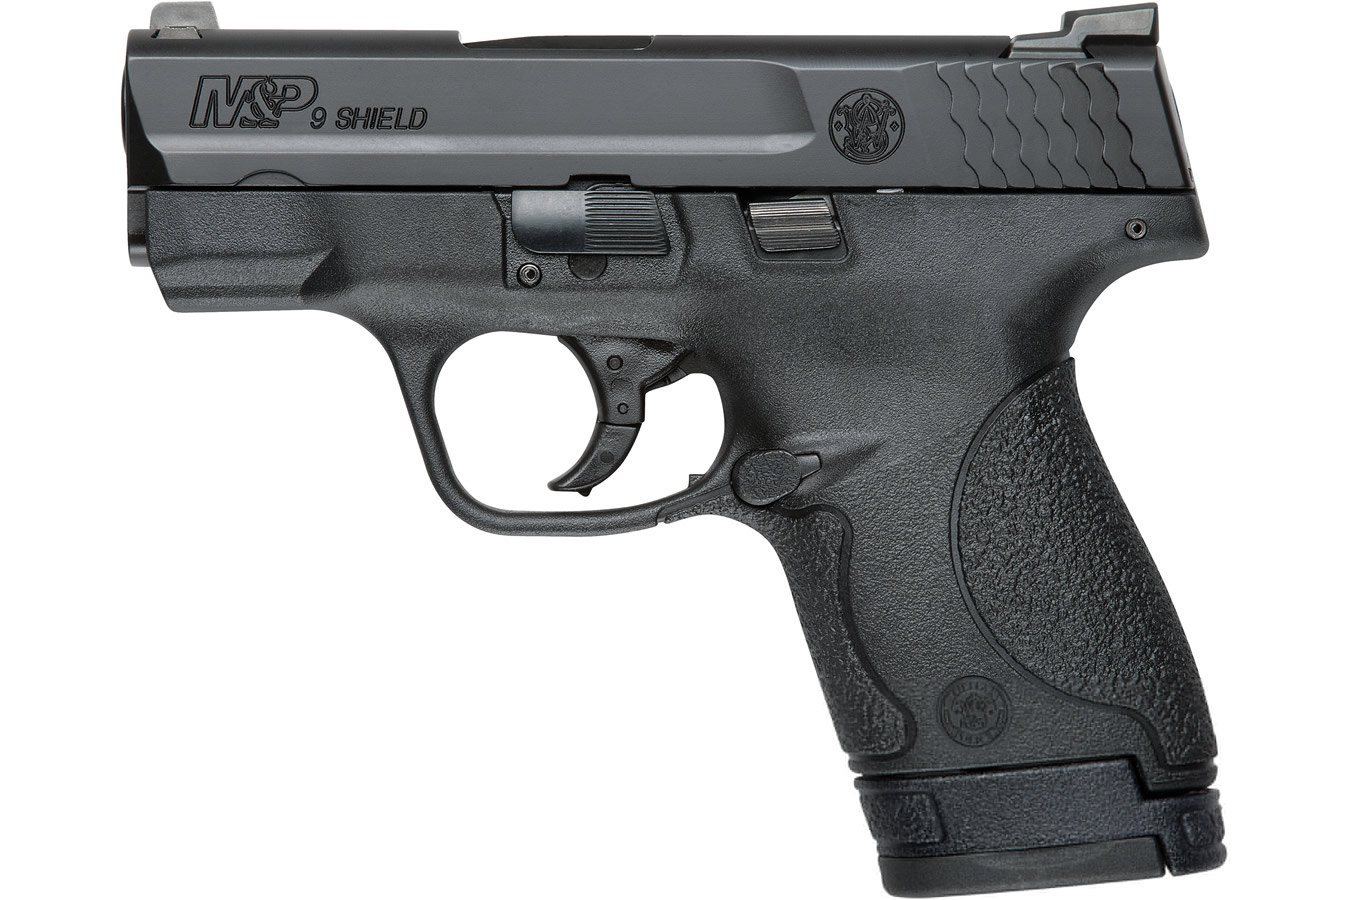 smith-wesson-m-p9-shield-9mm-centerfire-pistol-with-night-sights